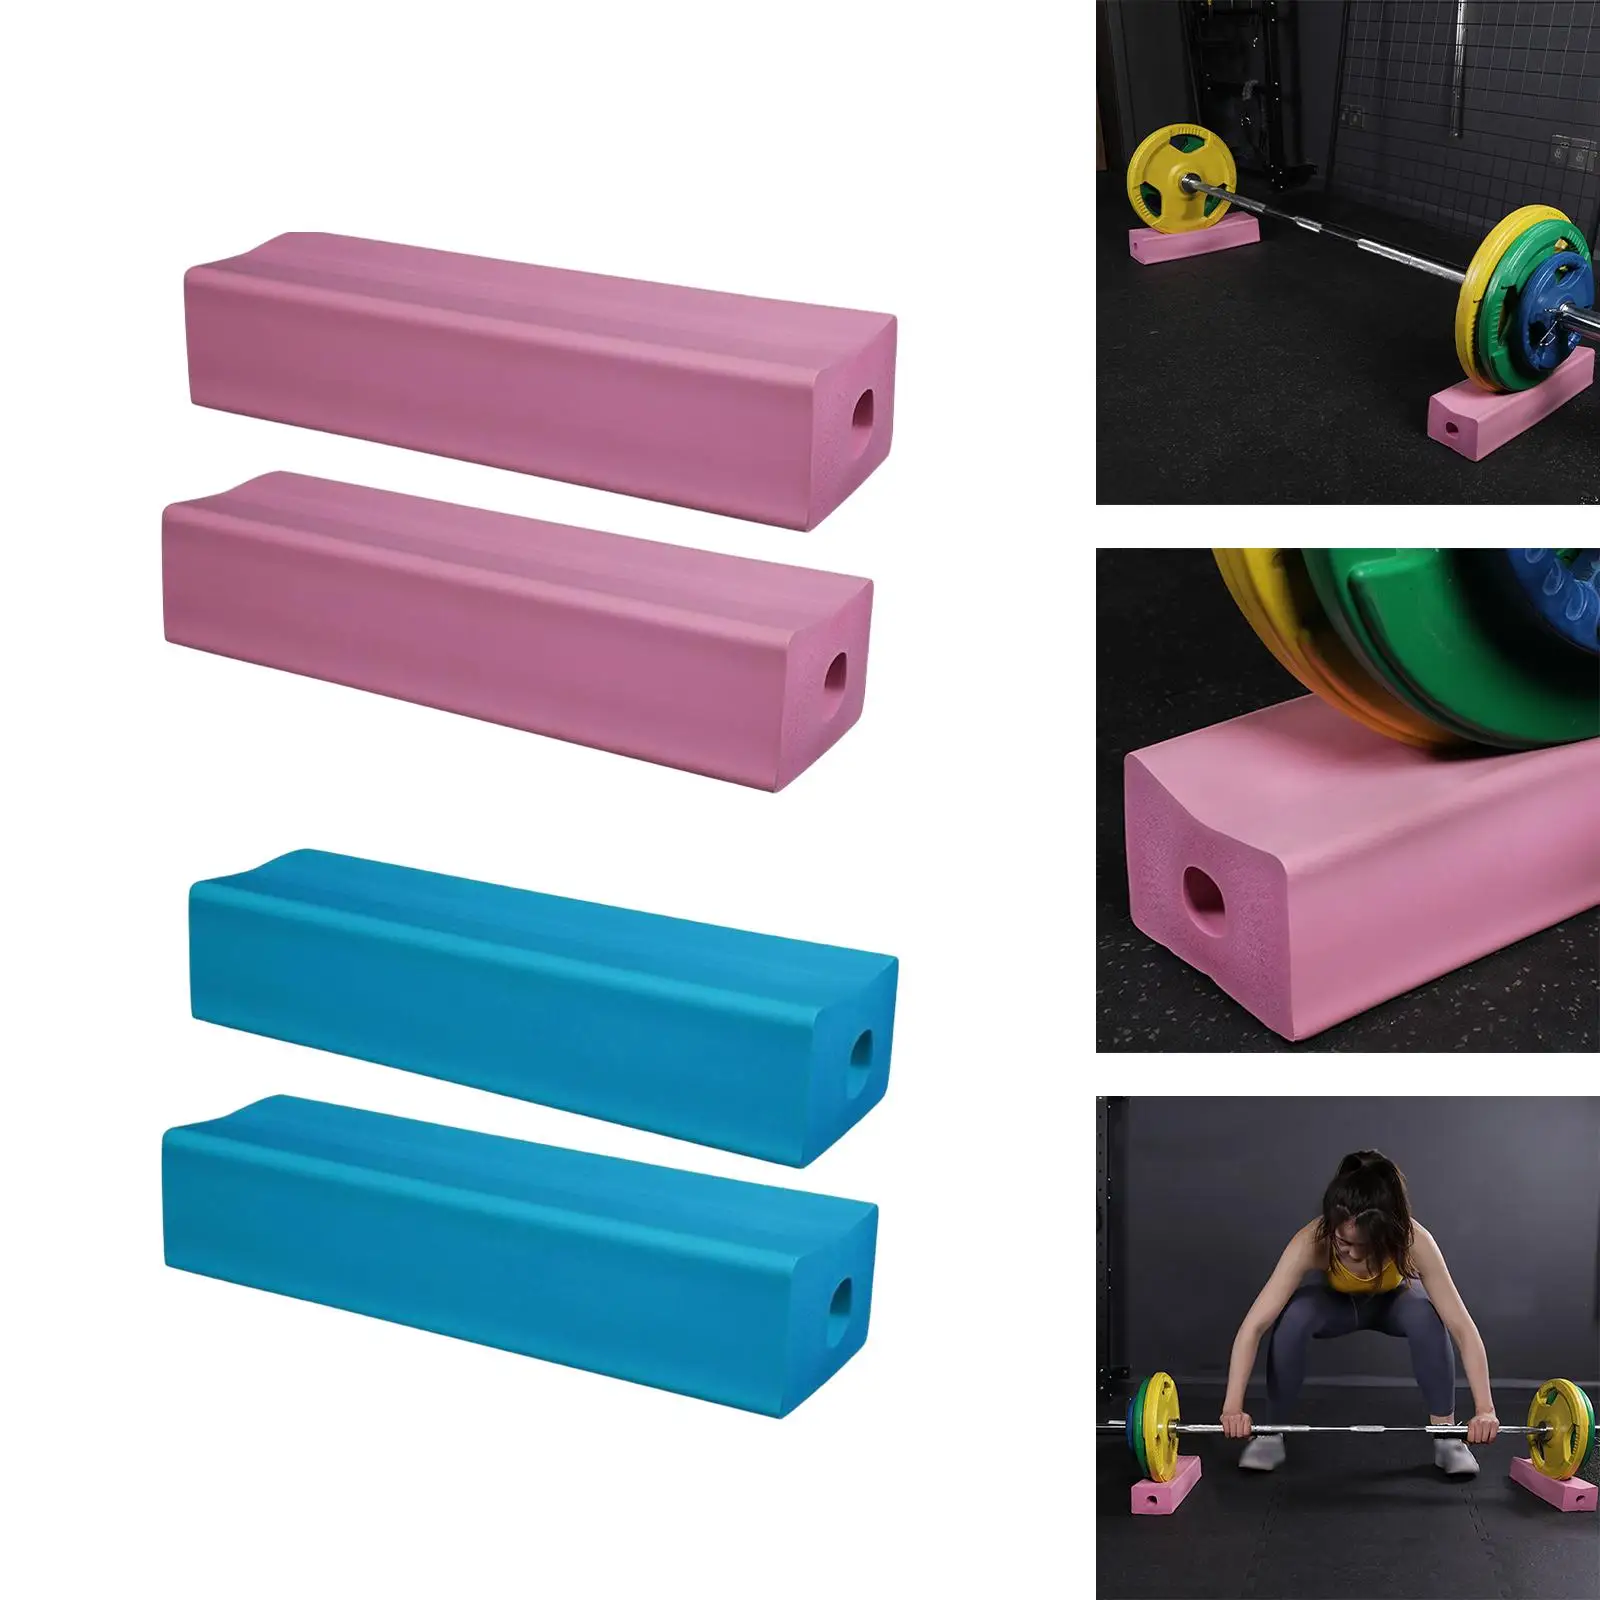 Barbell Crash Pad Protecting Floor Weight Lifting Drop Pads for Weightlifting Training Exercises Barbell Plates Fitness Home